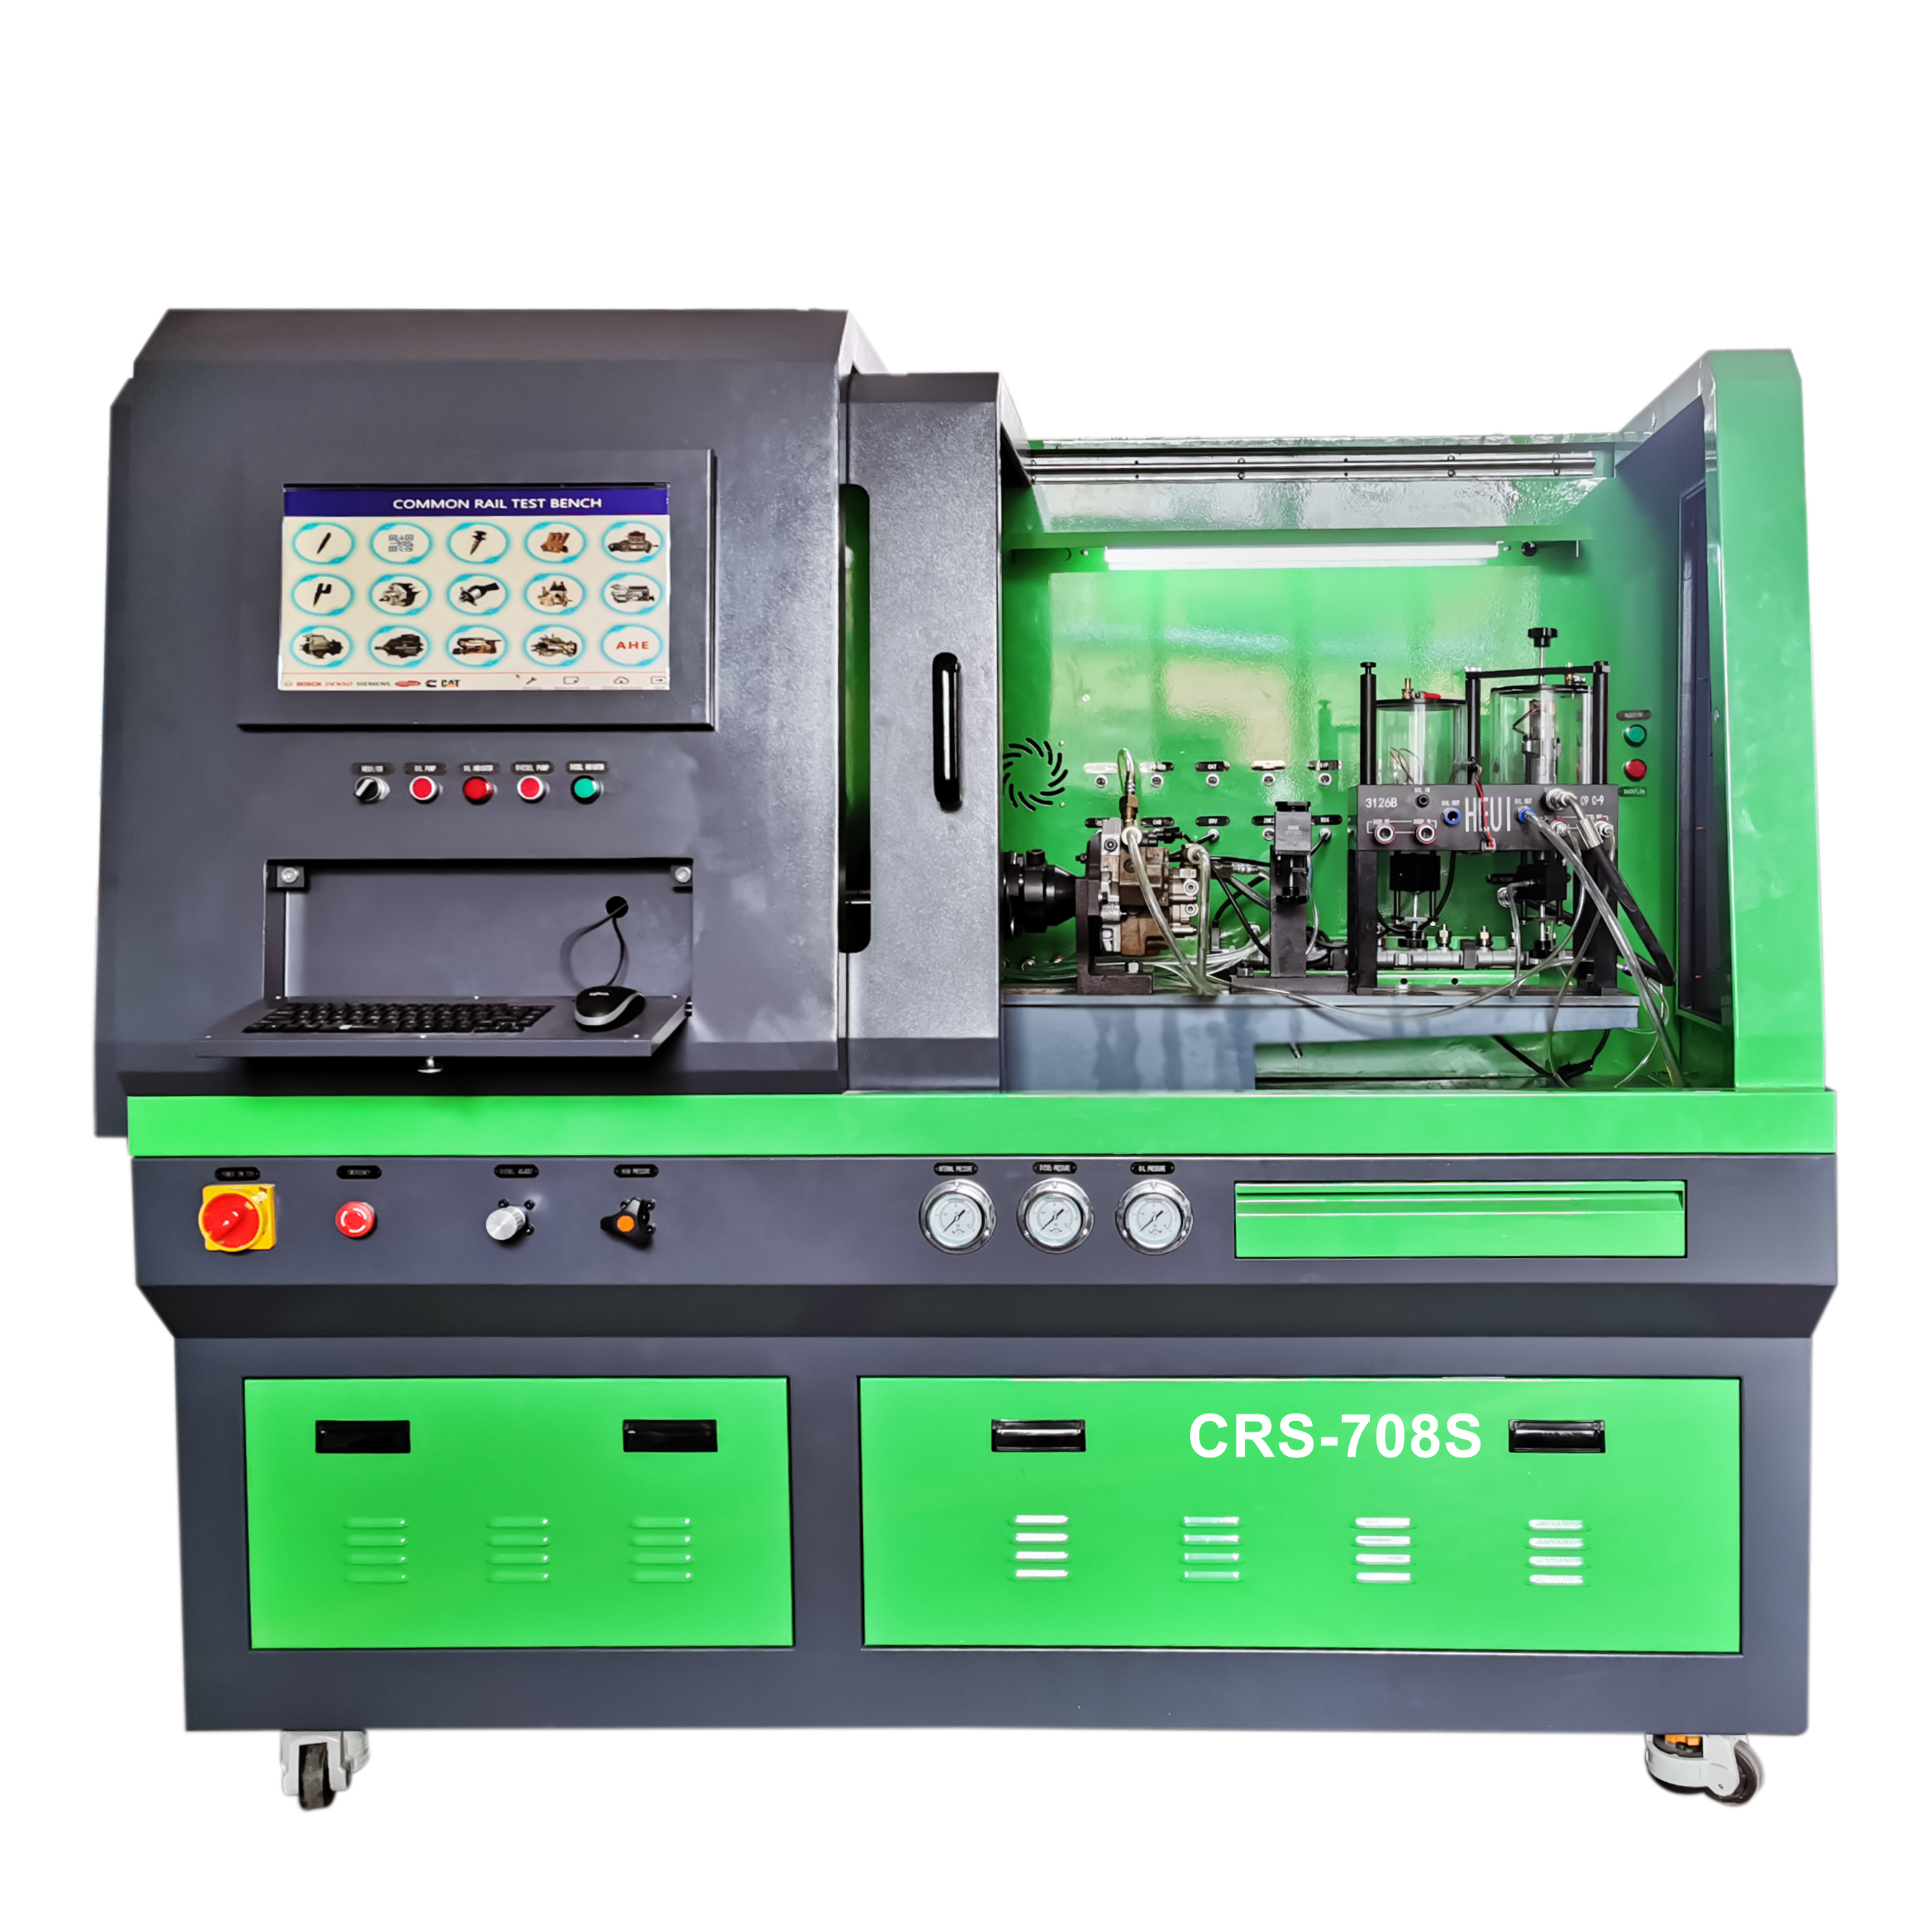 CRS-708S test bench introduce